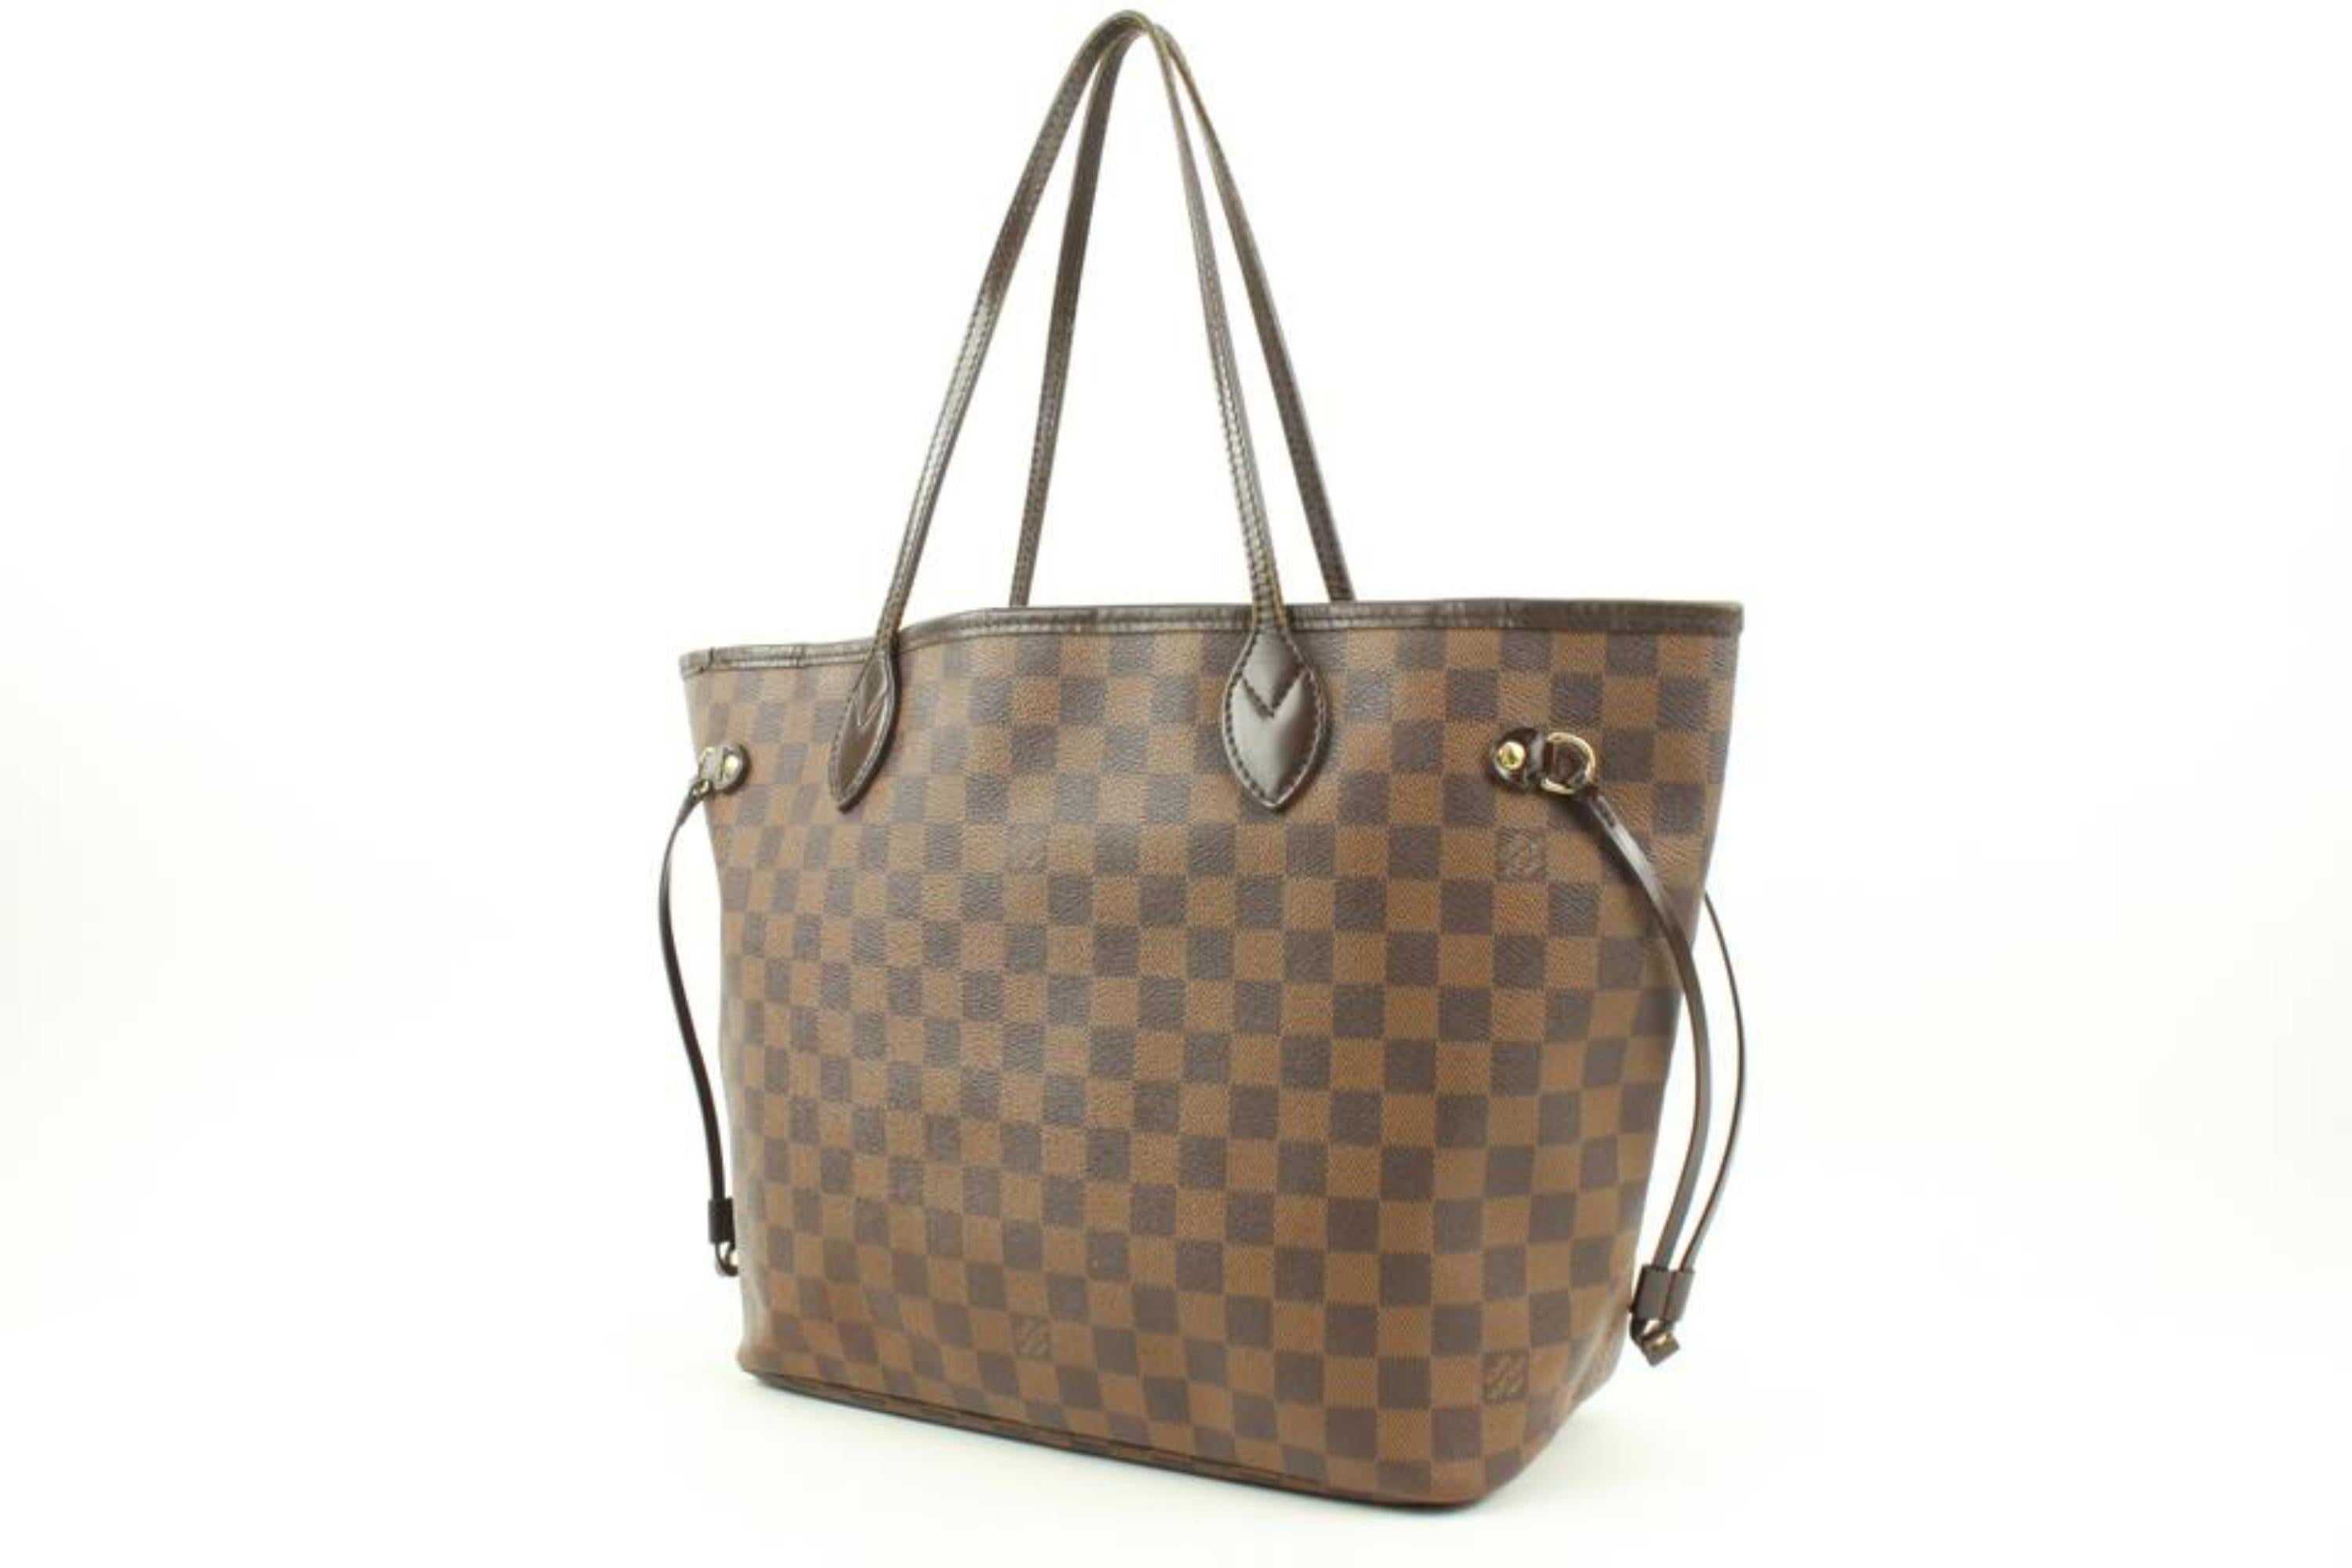 Louis Vuitton Damier Ebene Neverfull MM Tote Bag 52lv23s
Date Code/Serial Number: AR4028
Made In: France
Measurements: Length:  18.5